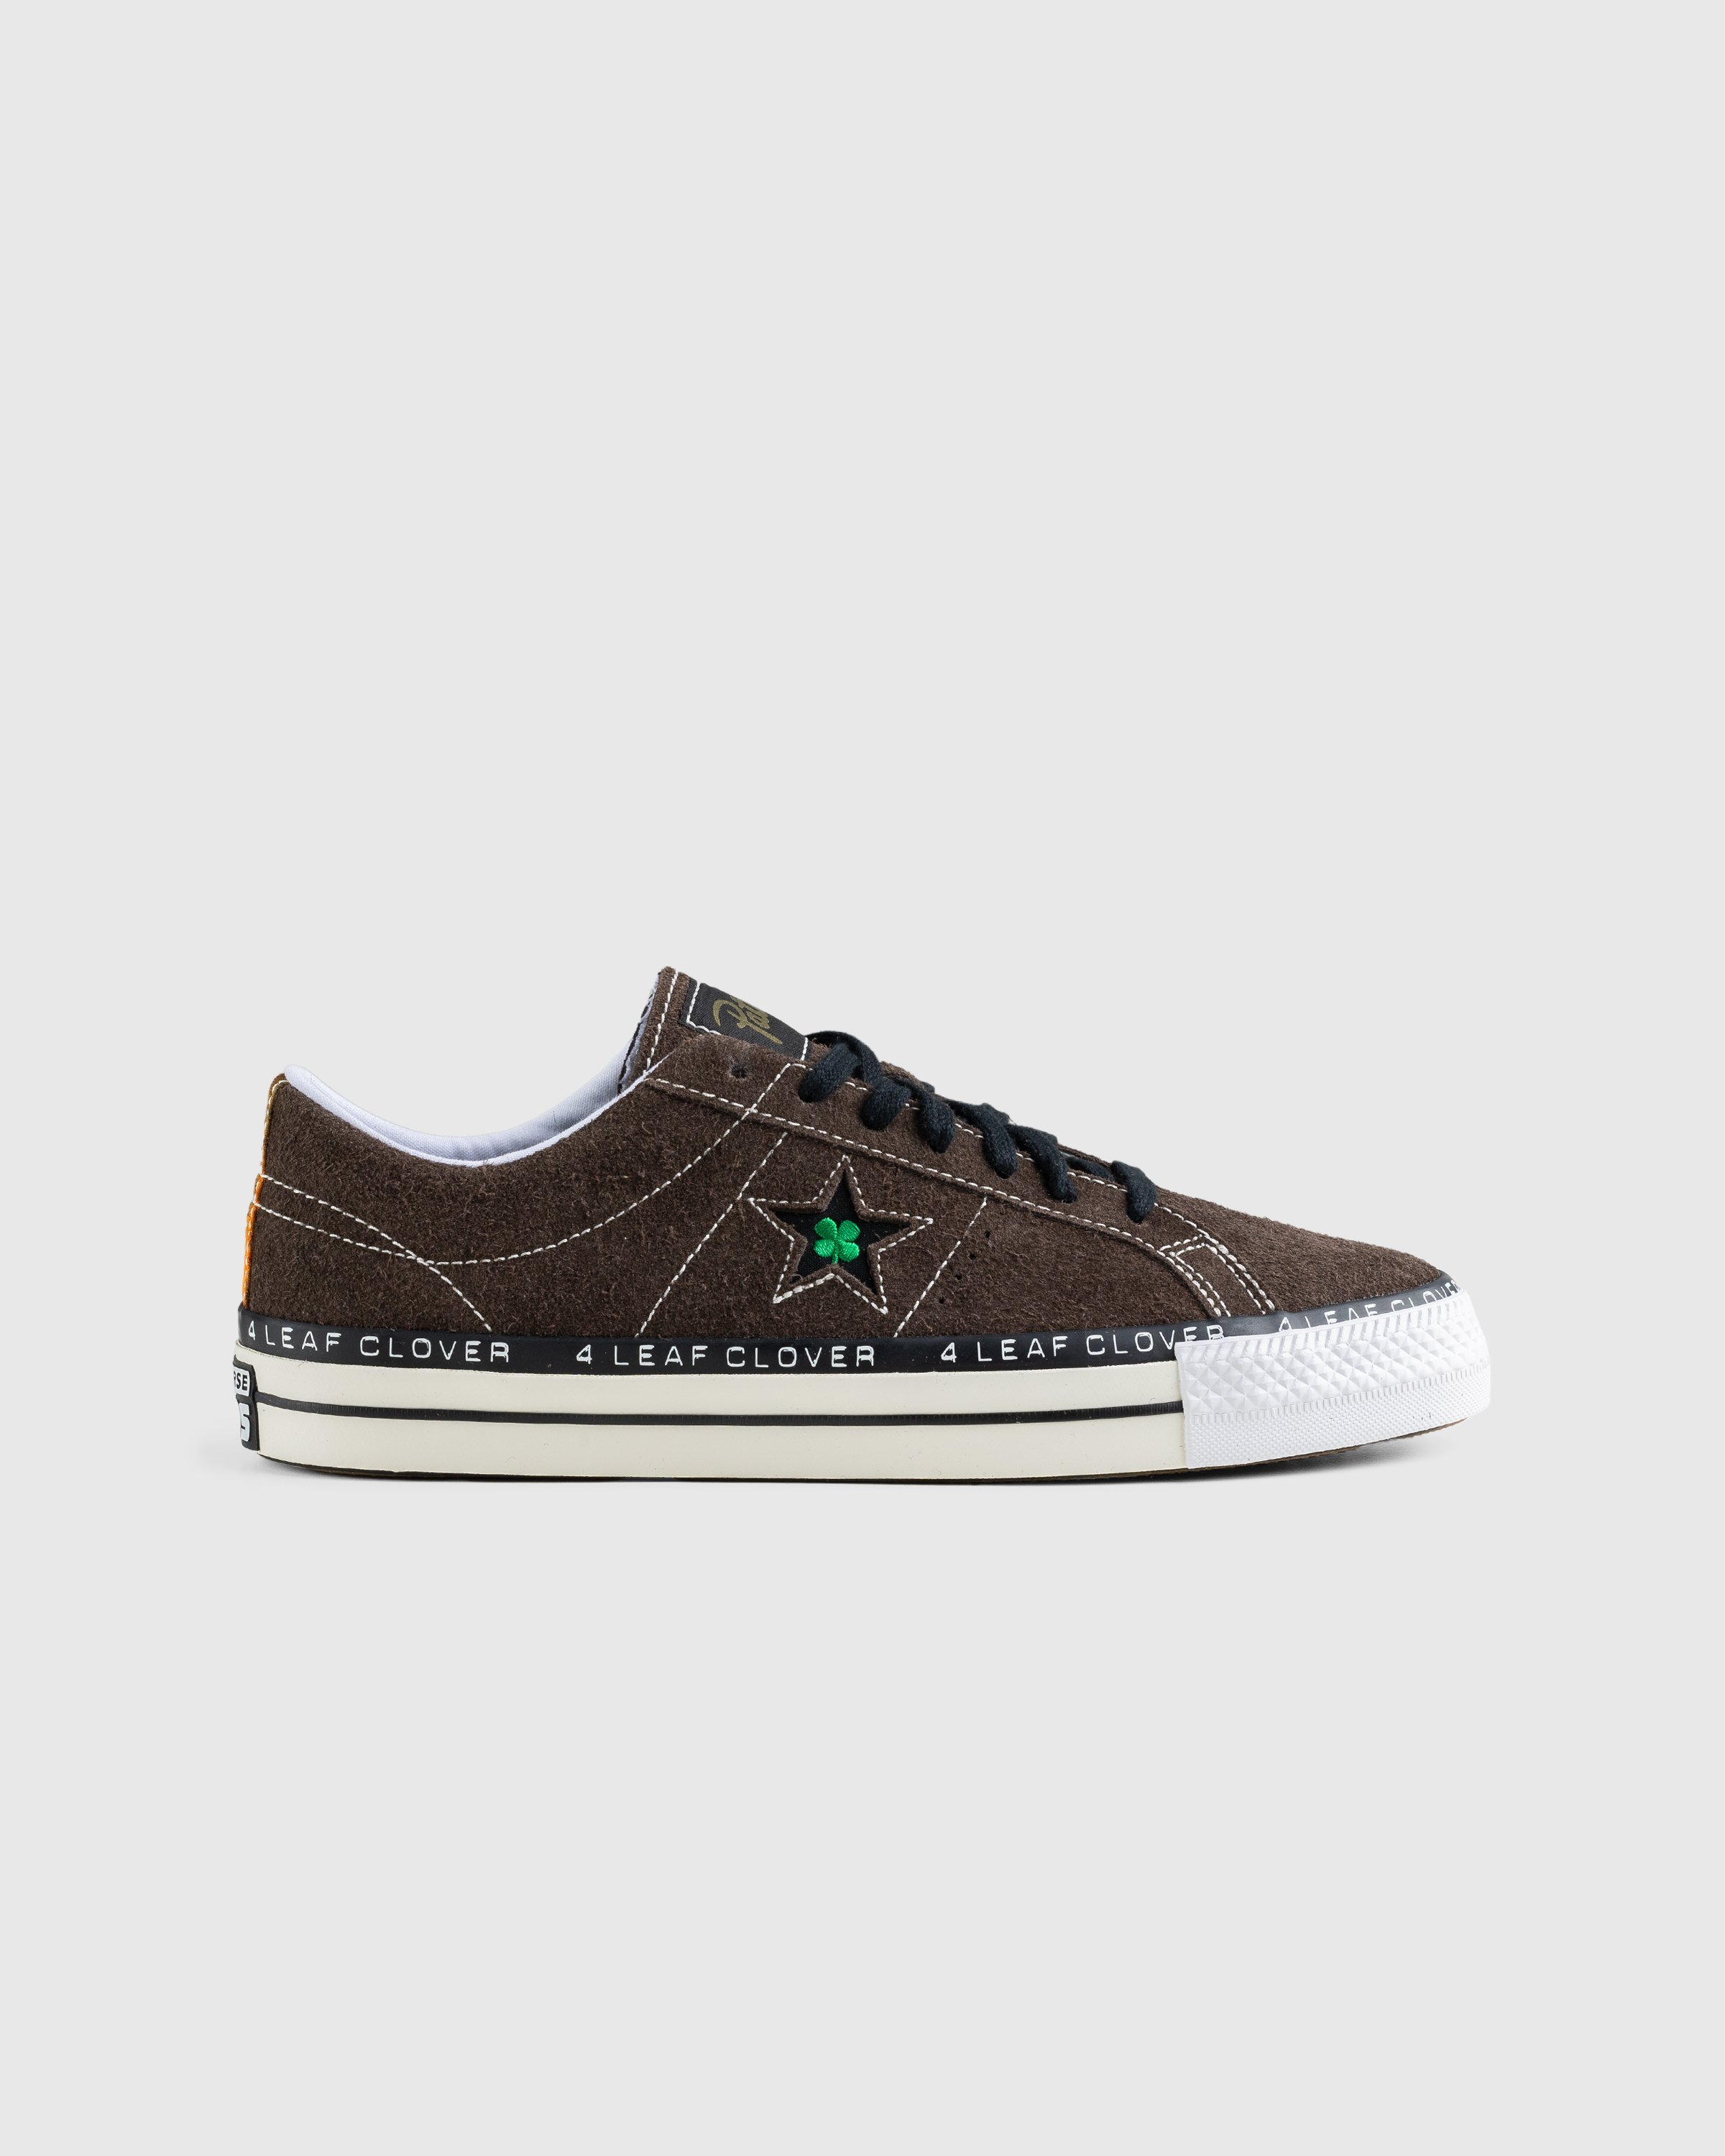 Patta x Converse - “Four Leaf Clover” One Star Pro - Footwear - Brown - Image 1